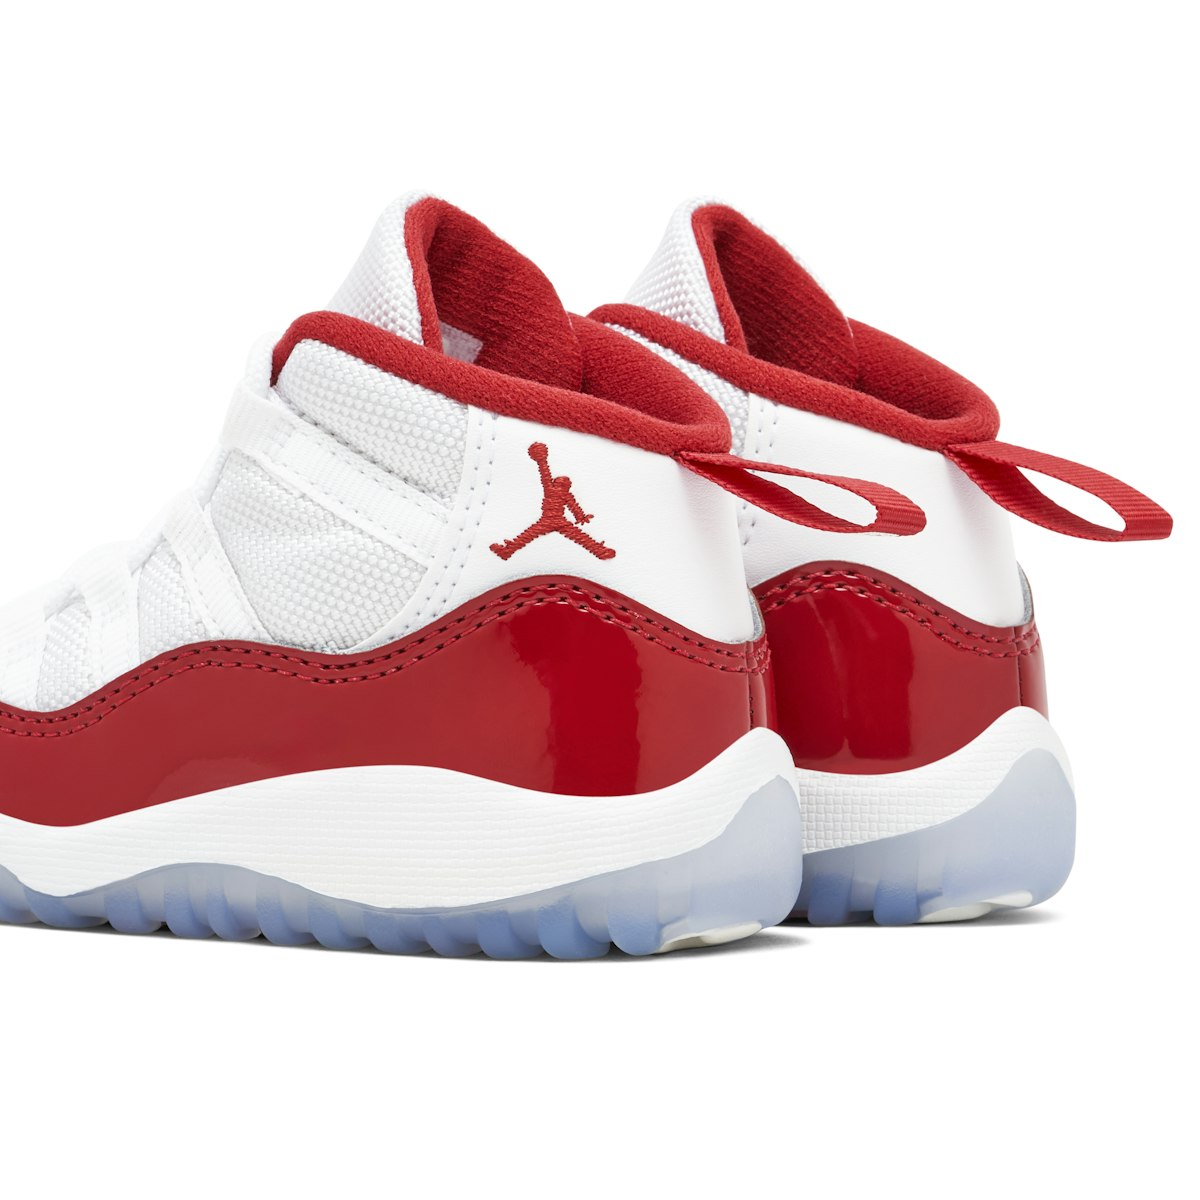  Jordan Toddler Air 11 TD 378040 116 Cherry - Size 8C :  Clothing, Shoes & Jewelry